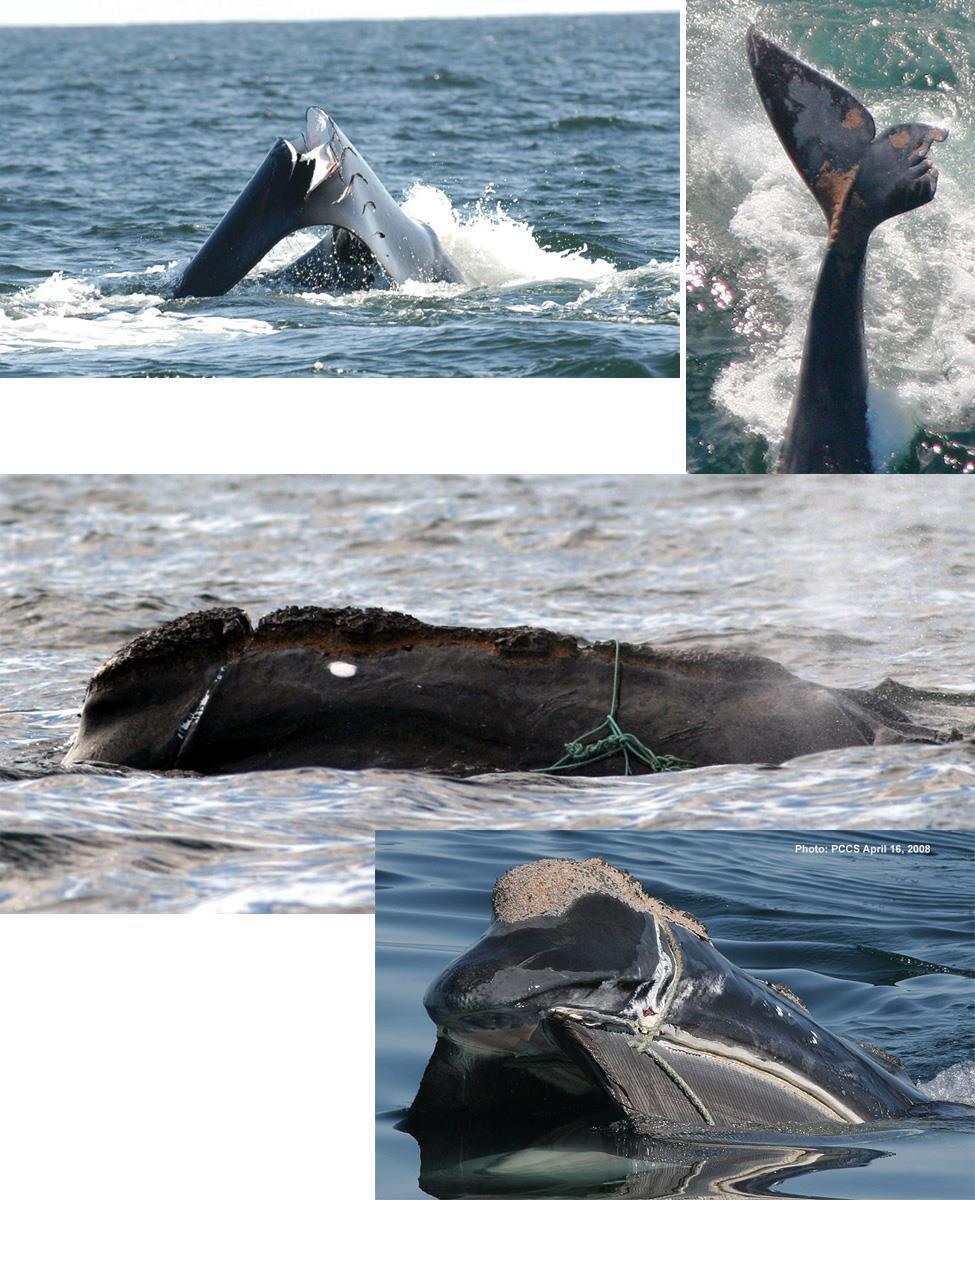 Figure C7. Above: A right whale struck by a vessel on 10 March 2005 off Georgia, and later sighted off Cape Cod again with injured flukes and orange cyamids present (Photos: M. Zani and T.